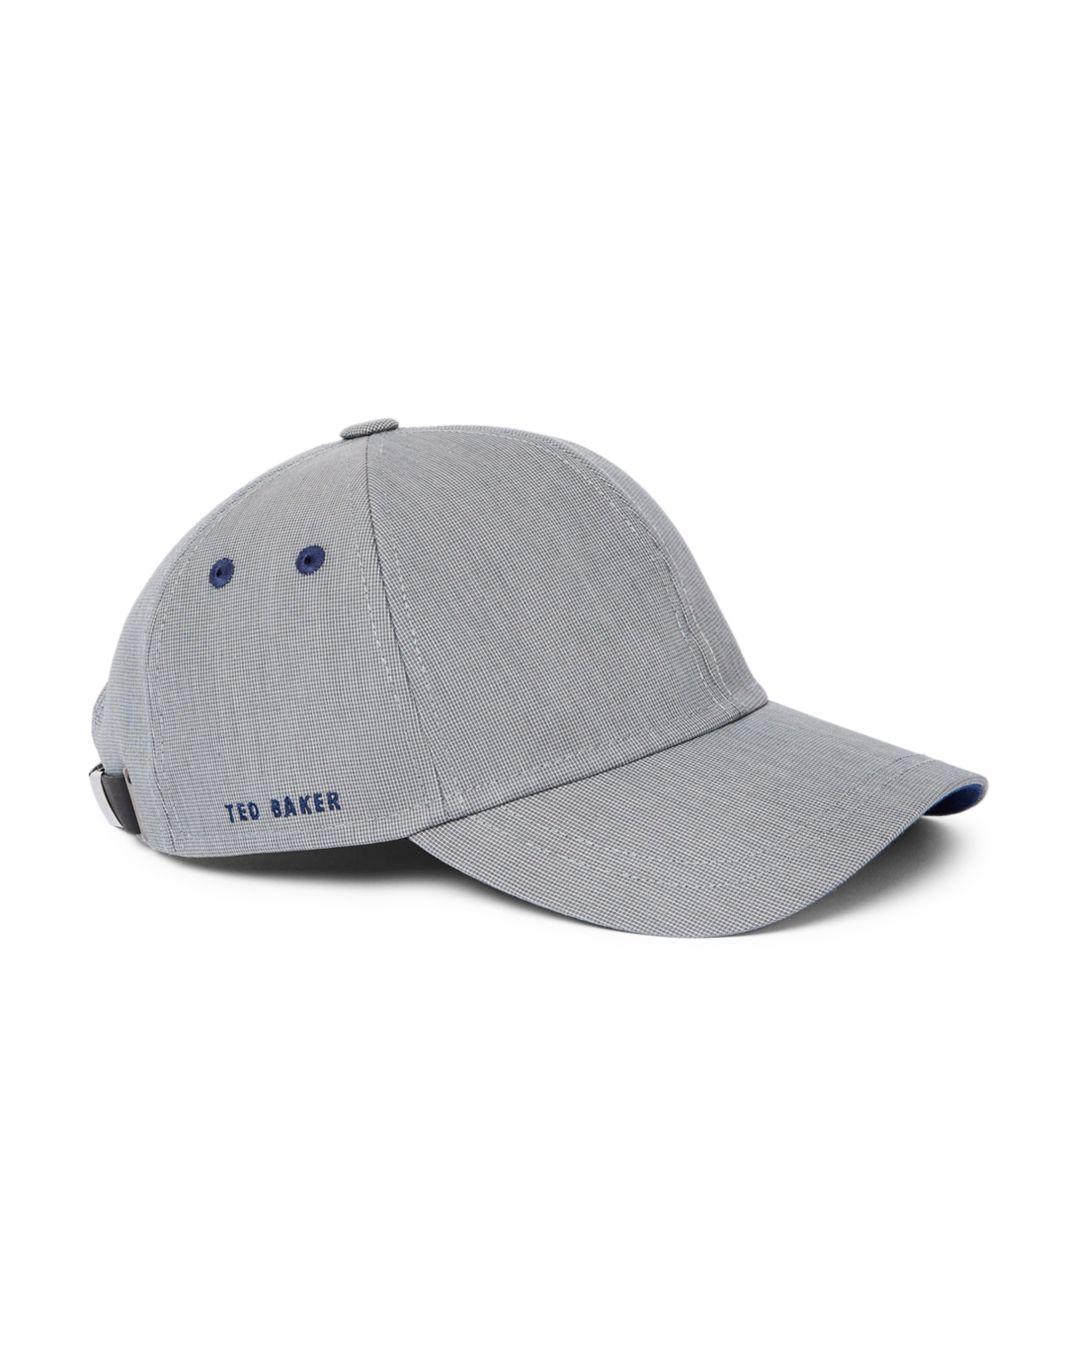 Ted Baker Synthetic Bristow Baseball Cap in Gray for Men - Lyst